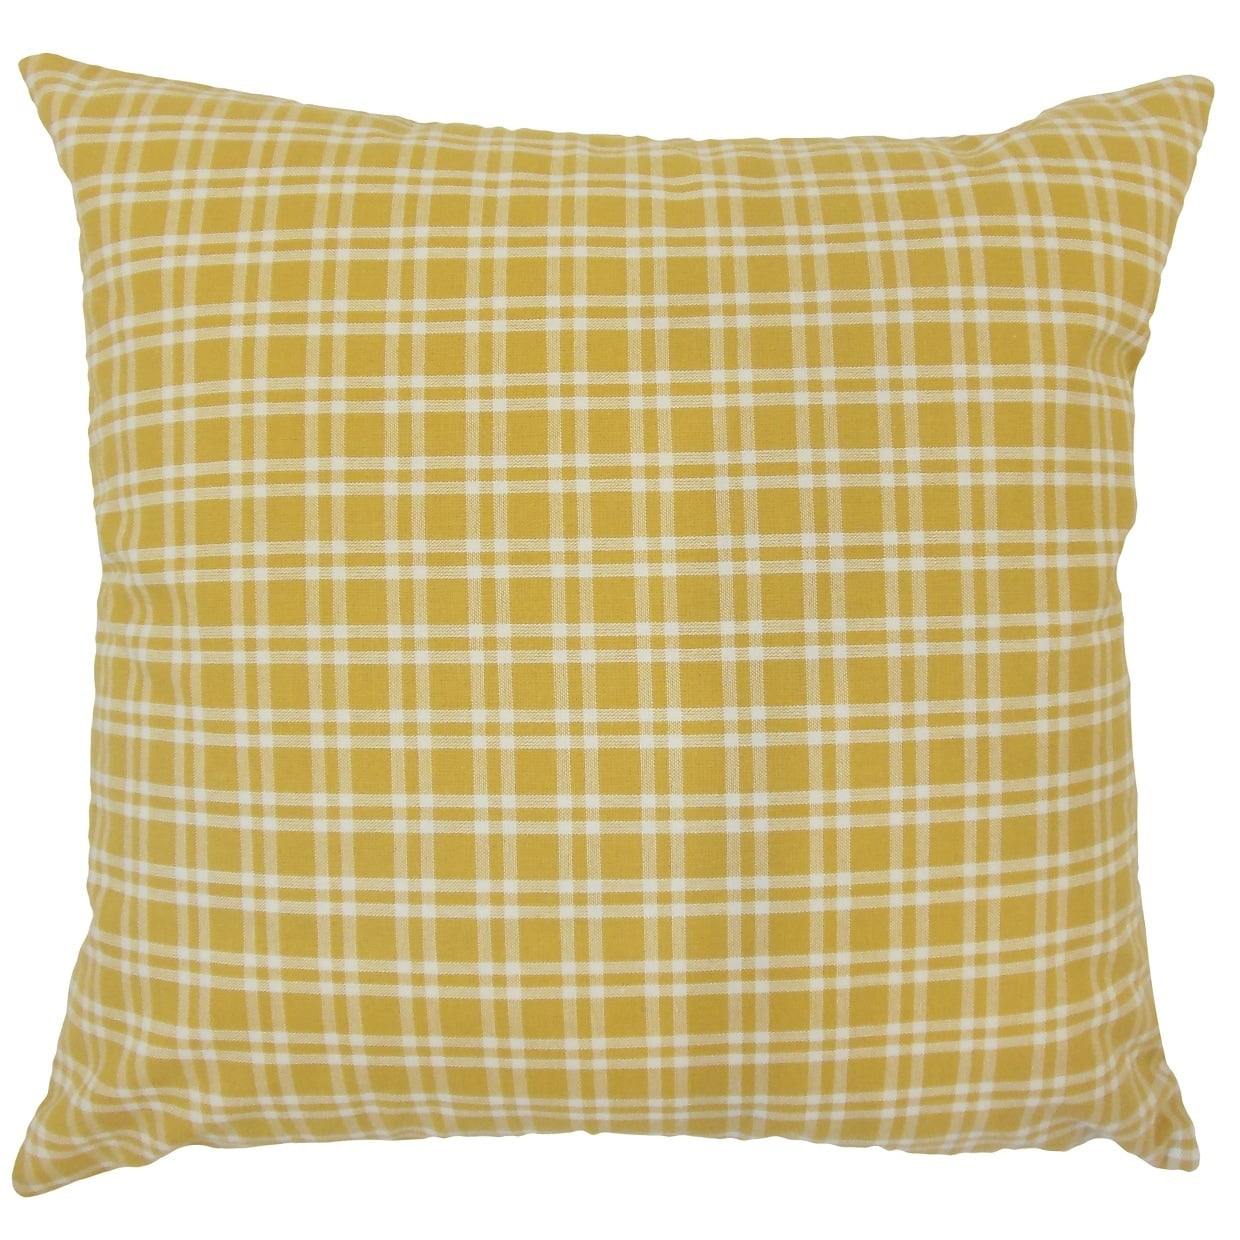 The Pillow Collection Damond Plaid Yellow Down Filled Throw Pillow.